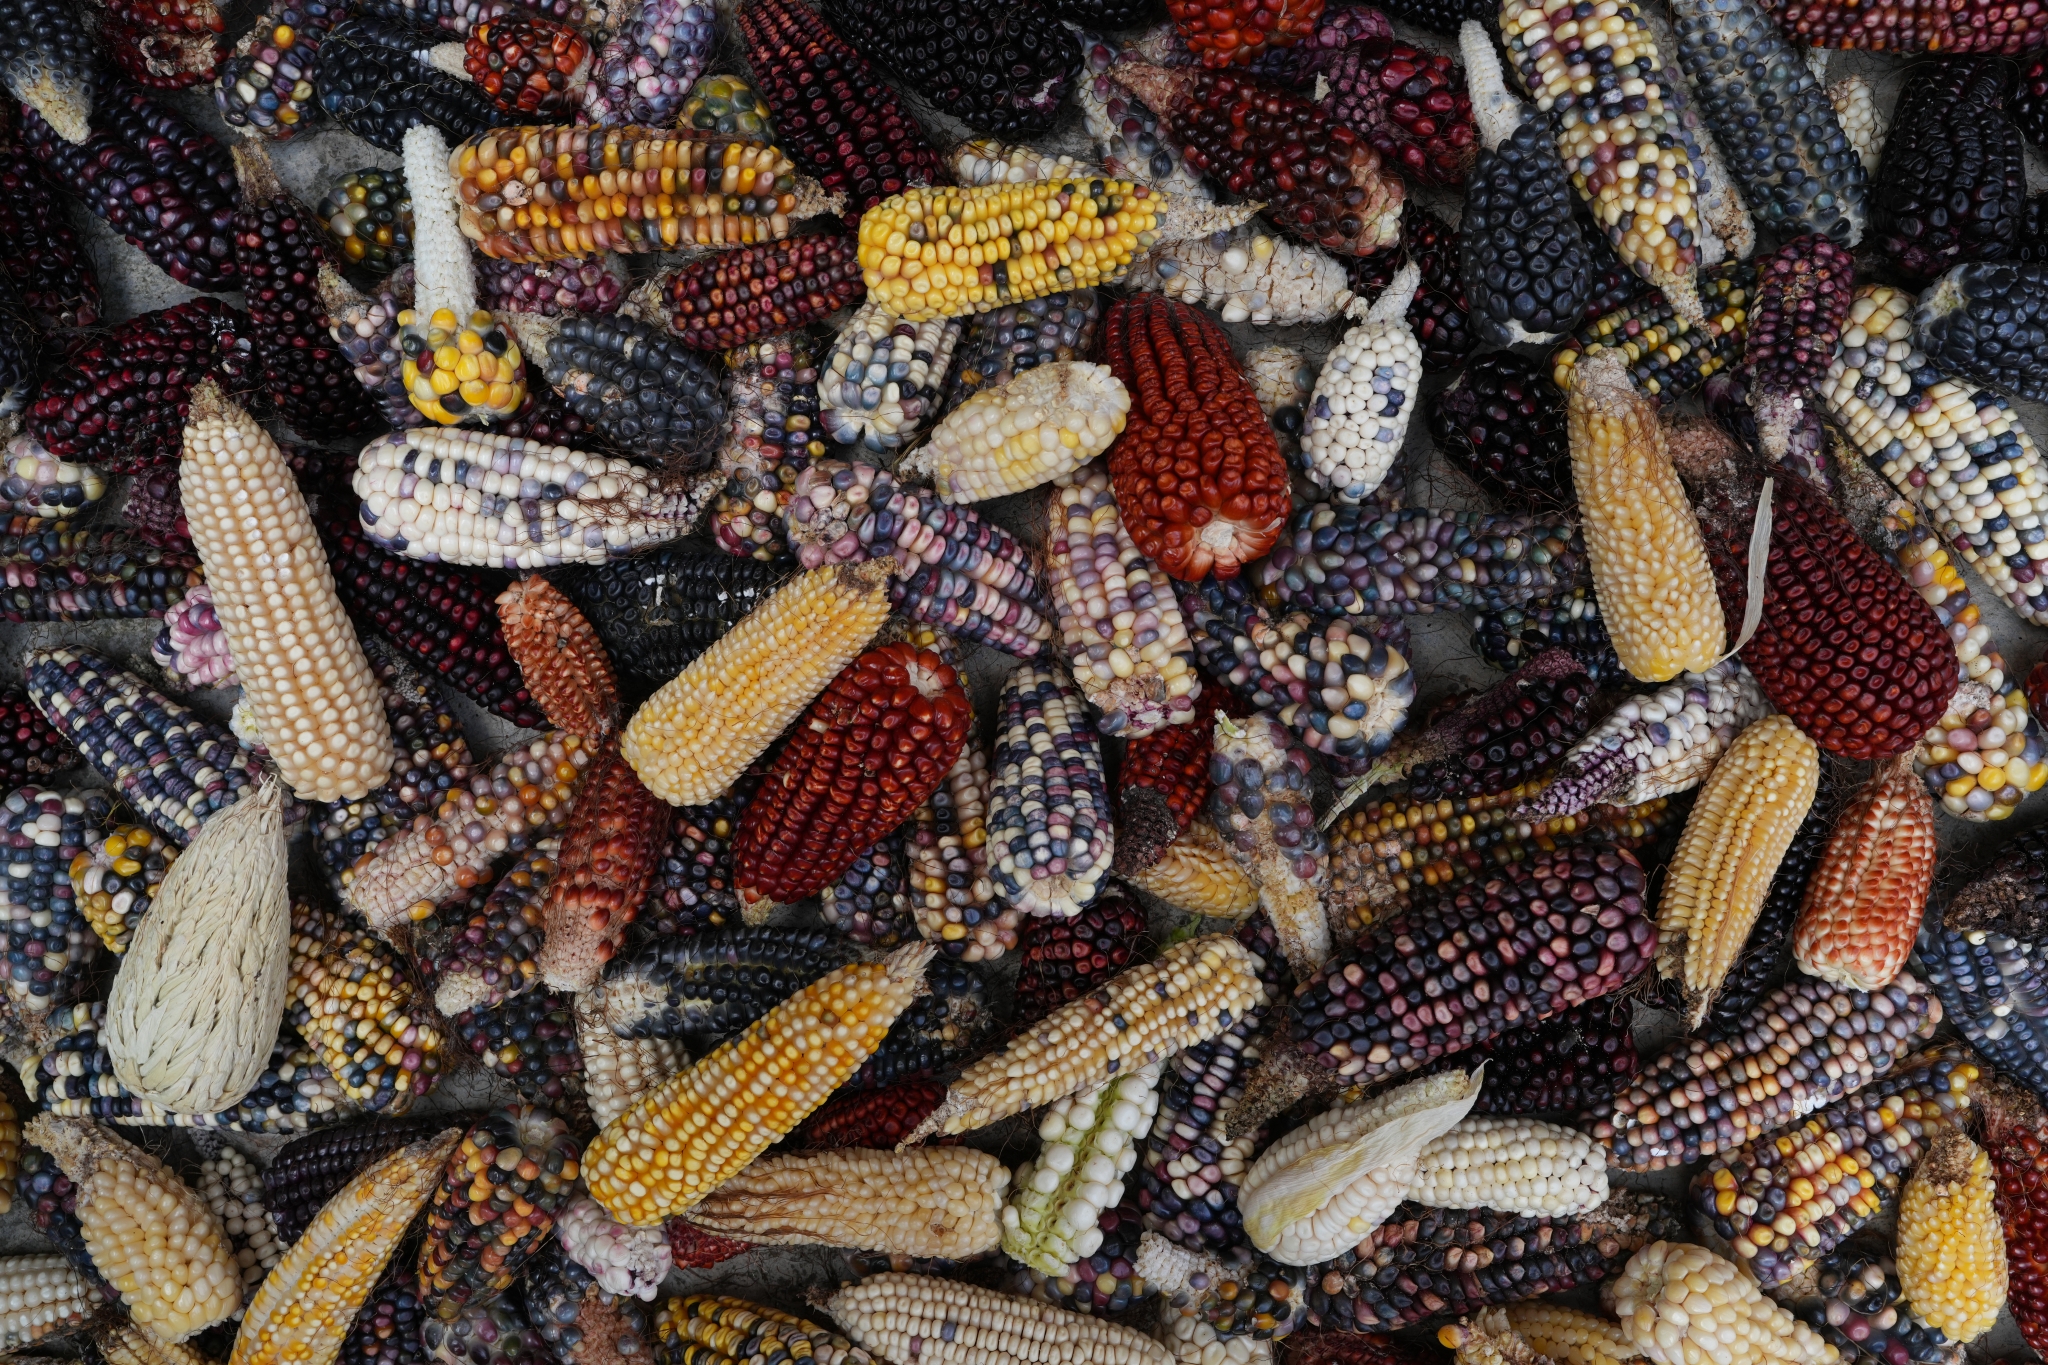 An assortment of different kinds of maize